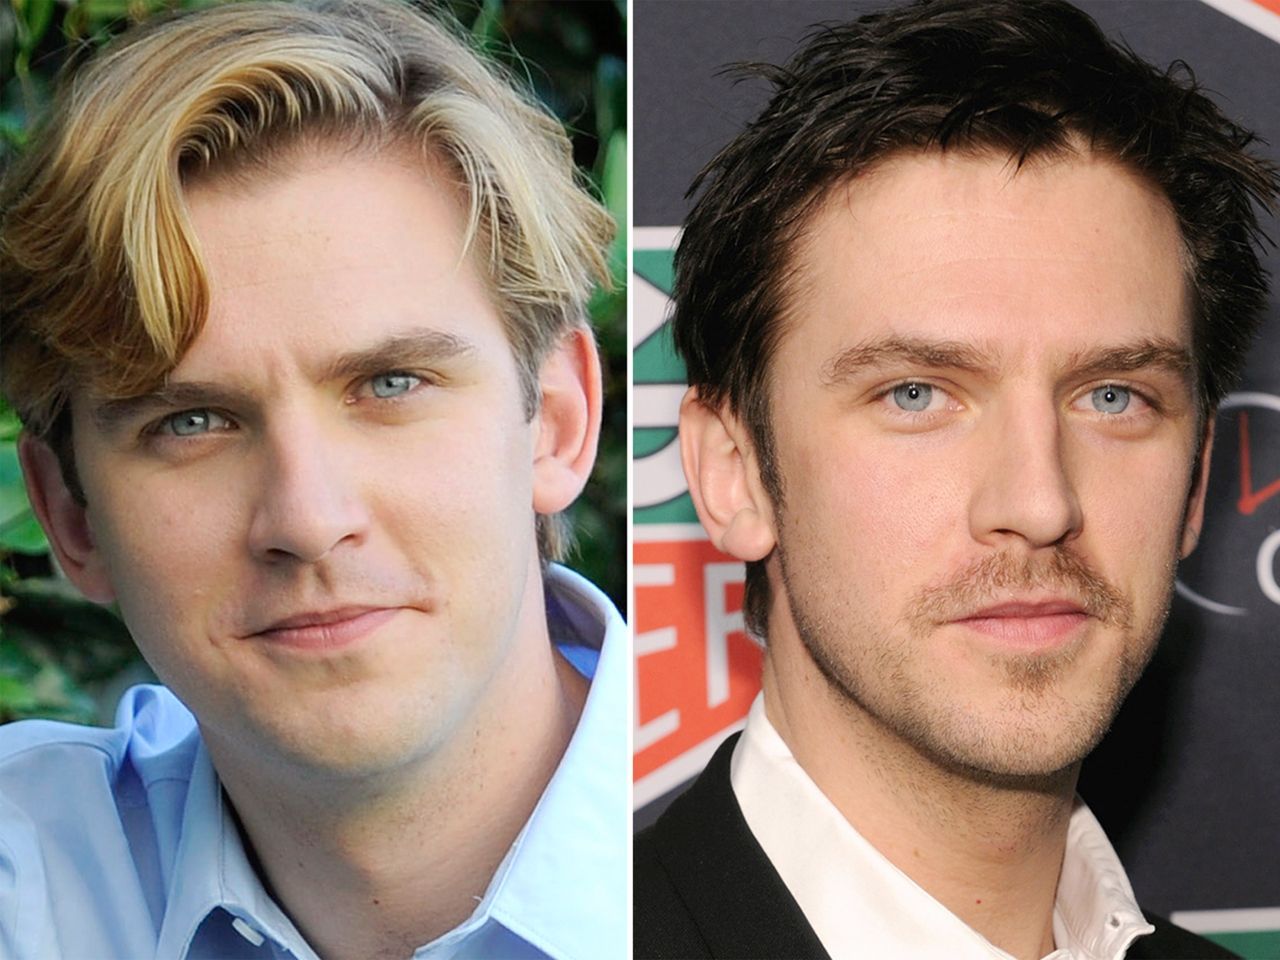 Matthew from 'Downton Abbey' ditches the blond hair – but I think he mad